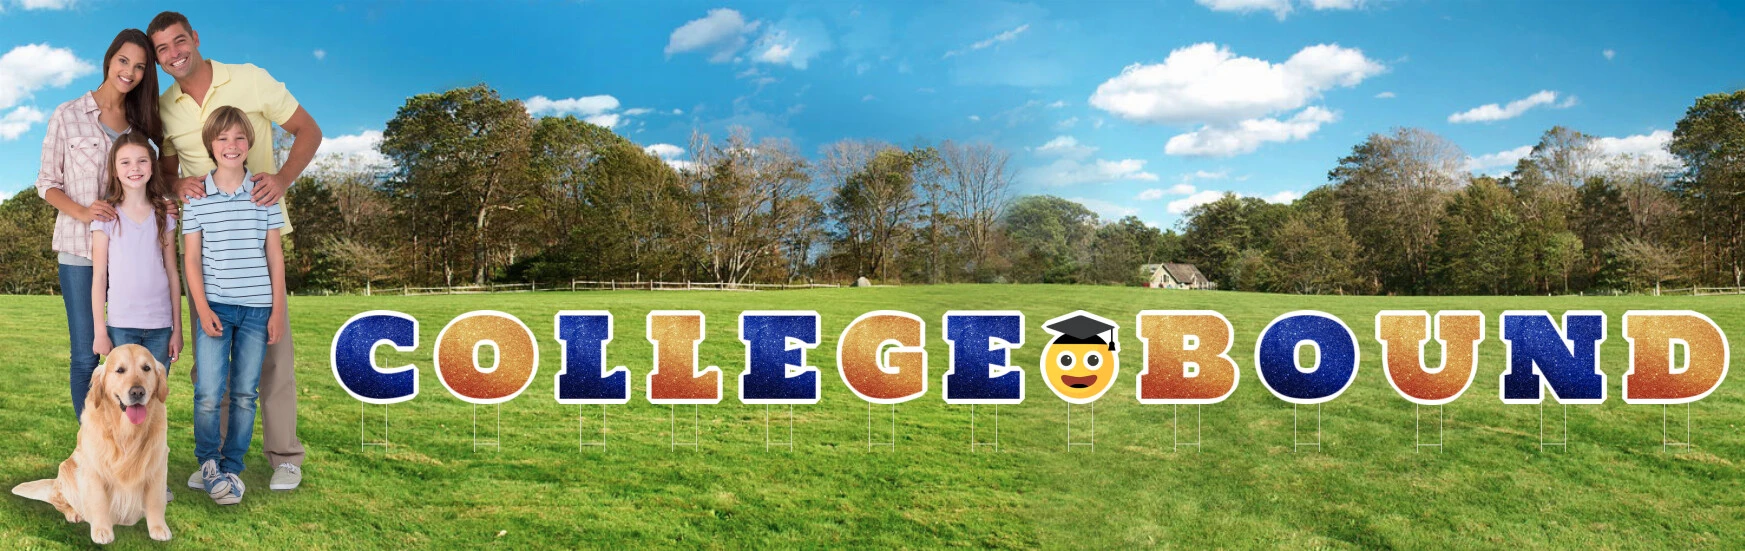 college bound letters in a lawn from partywords.com